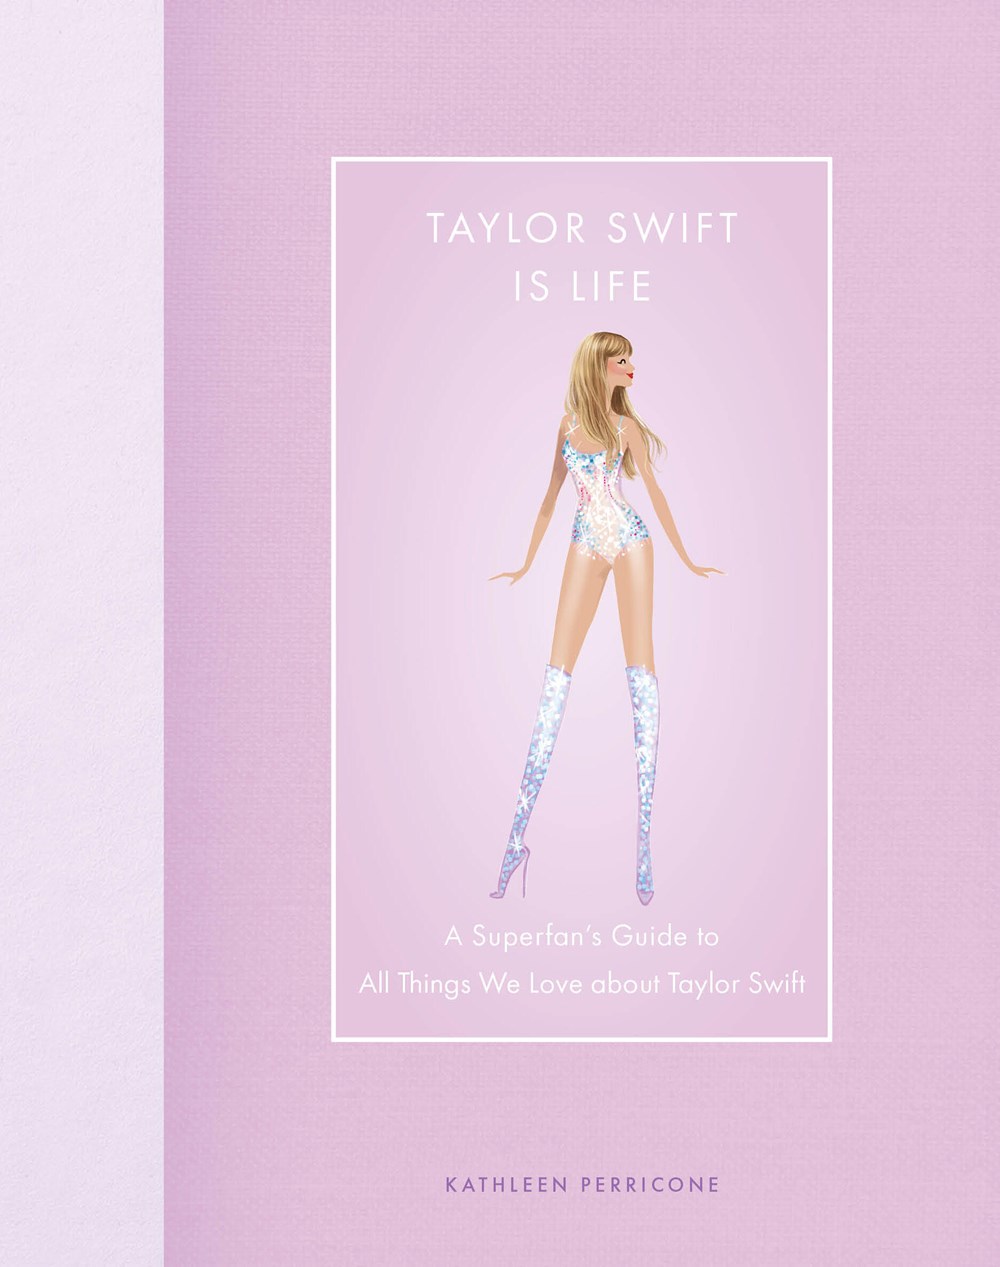 Taylor Swift Is Life: A Superfan’s Guide to All Things We Love About Taylor Swift